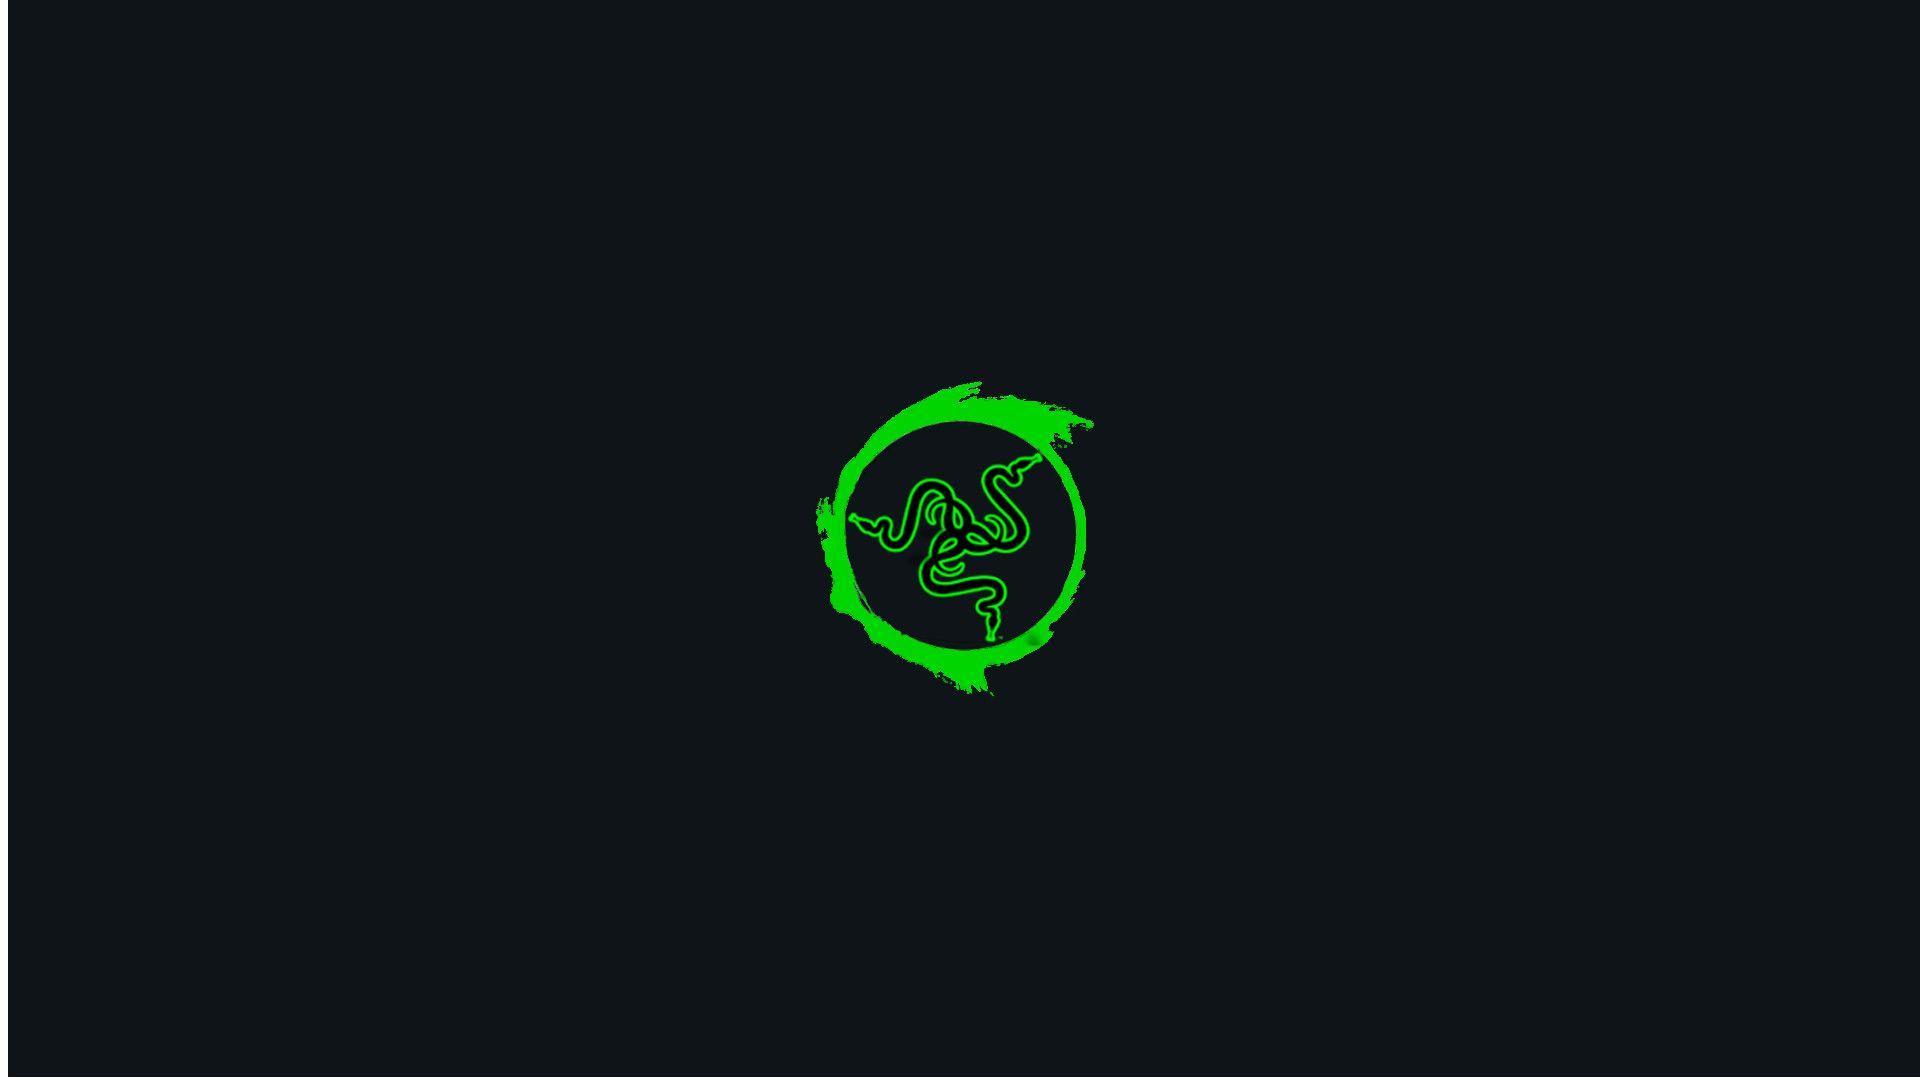 Razer Razer Walppaper GIF - Razer Razer Walppaper - Discover